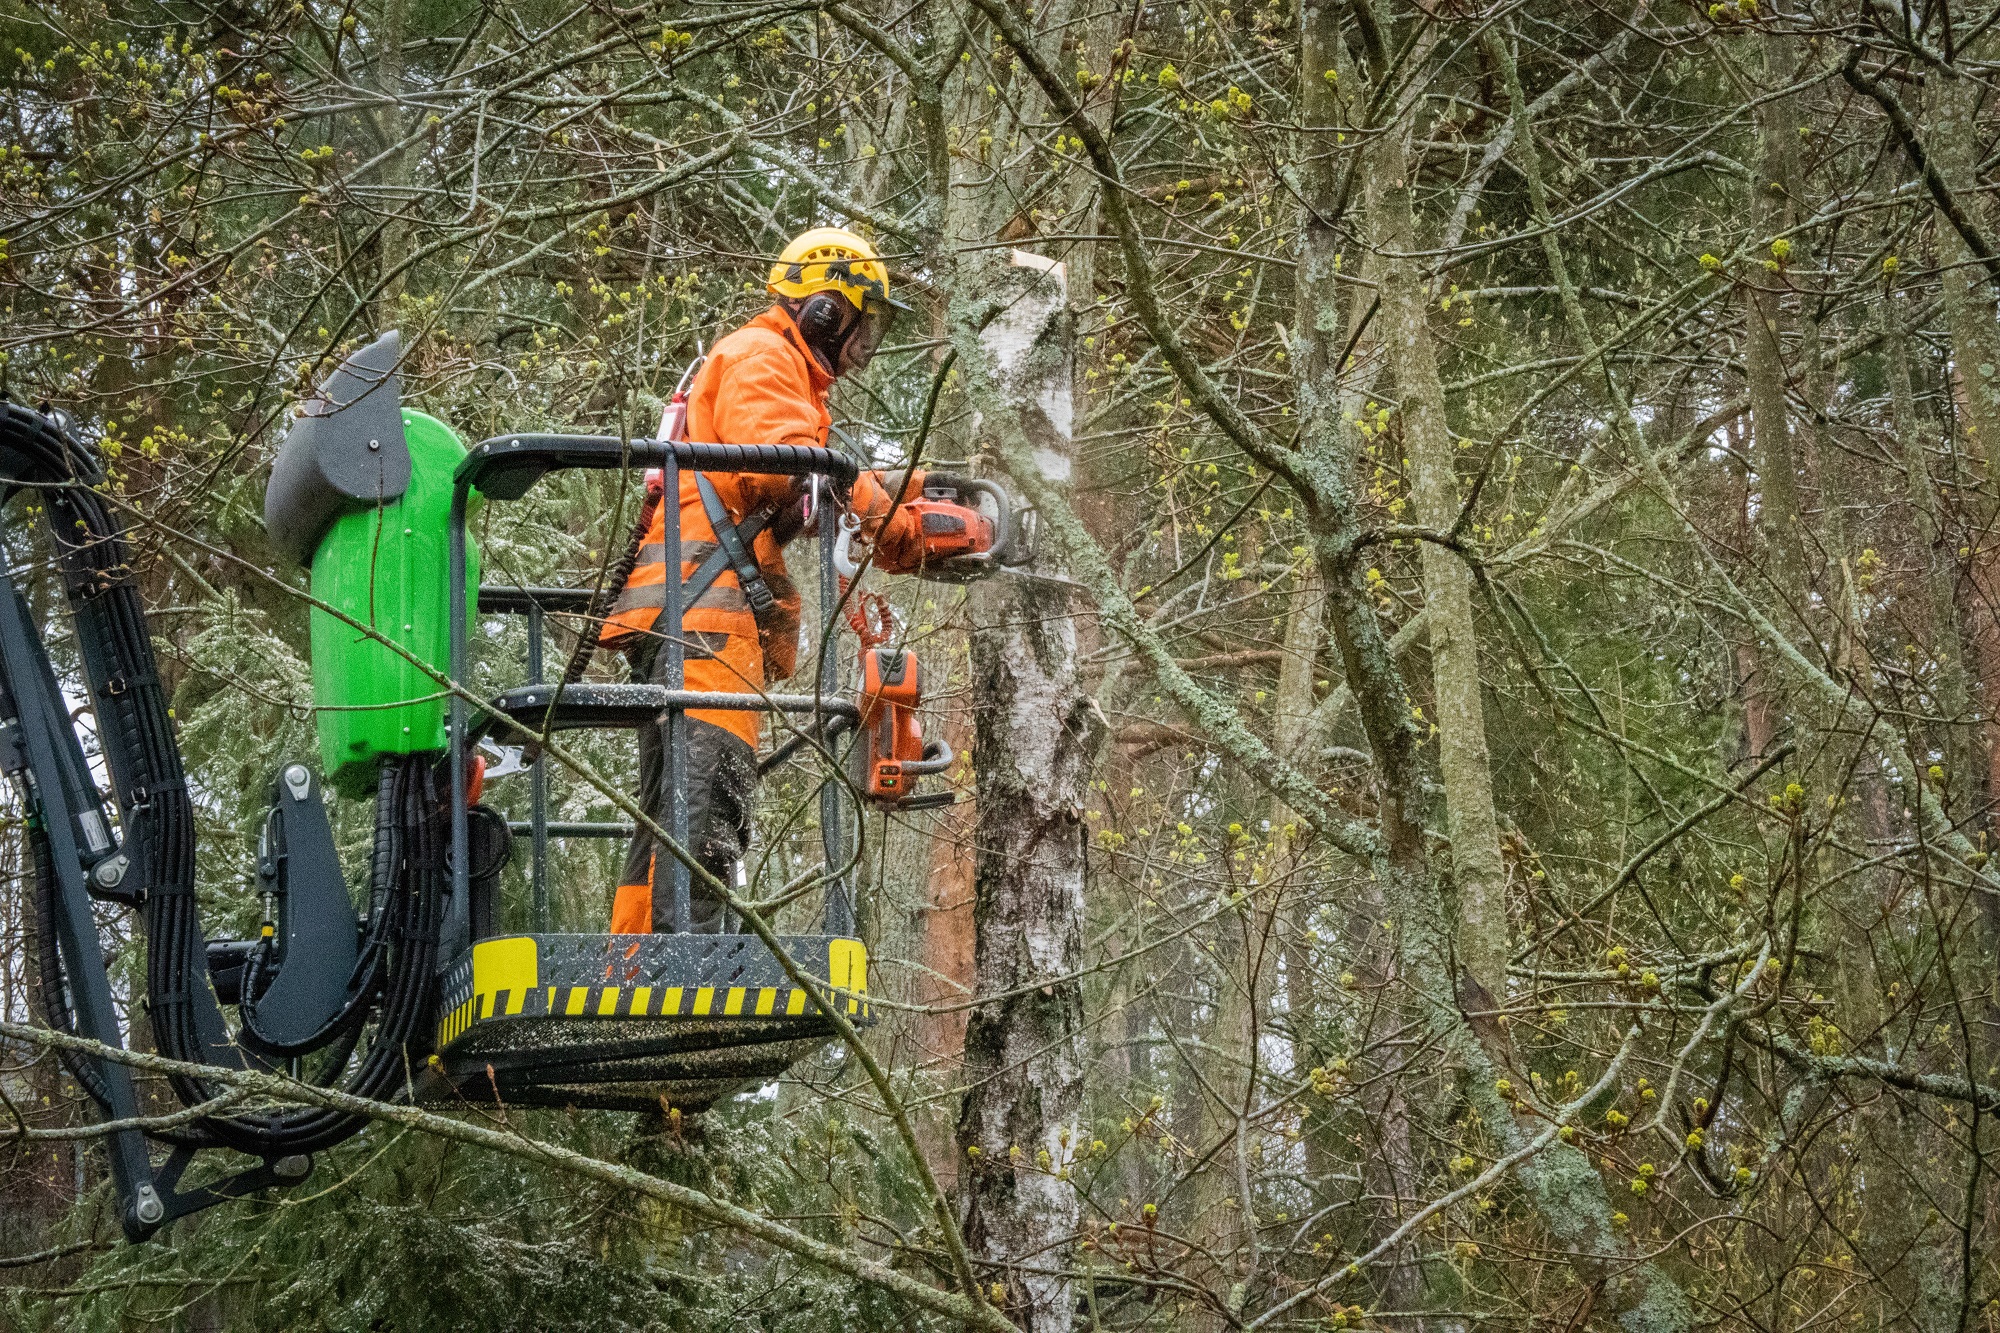 Leguan 190 helps a tree care company take down any tree – fast and safely